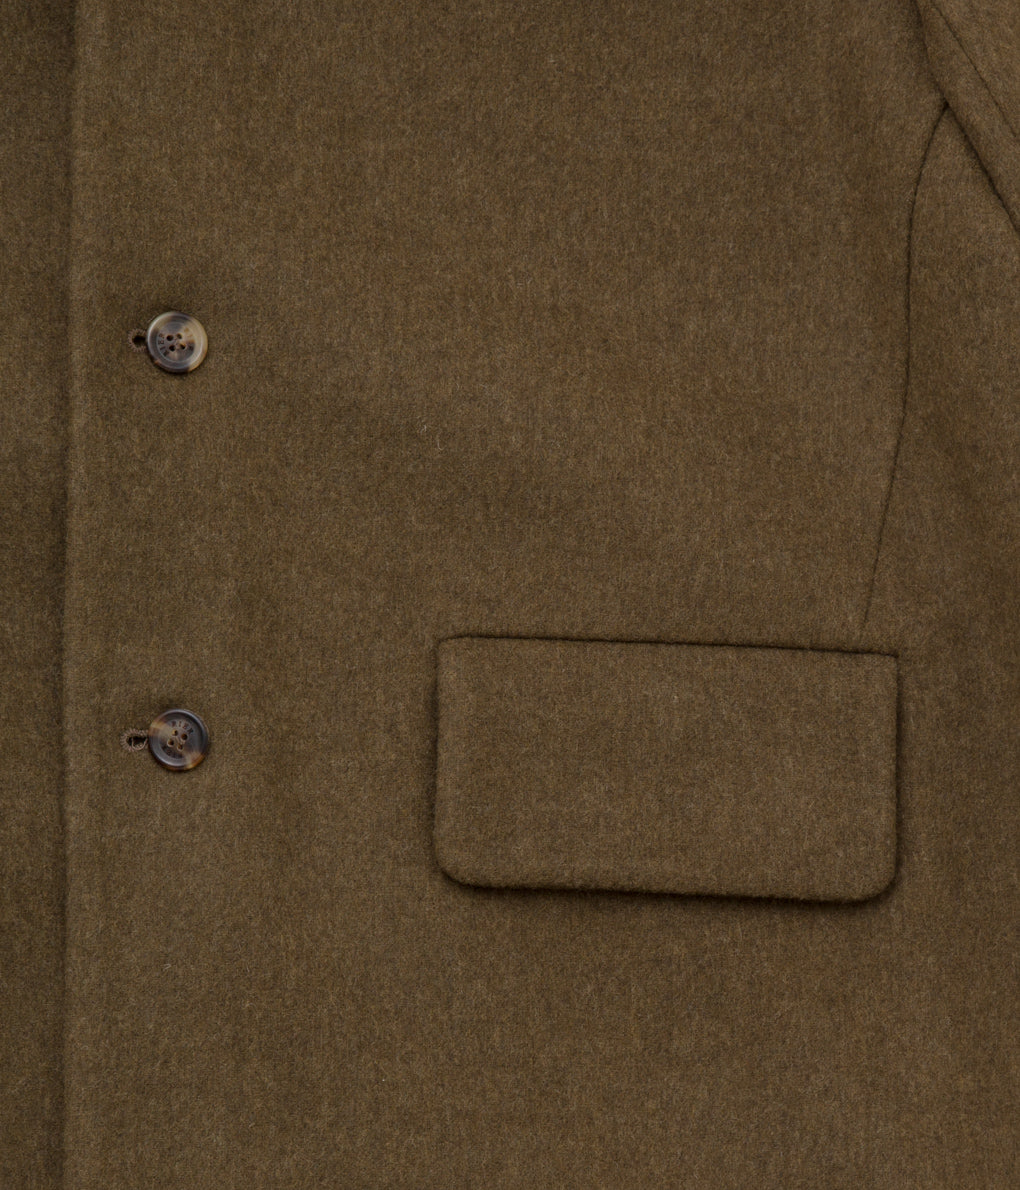 RIER "CLASSIC COAT 3 BUTTONS"(MOSS FOREST)